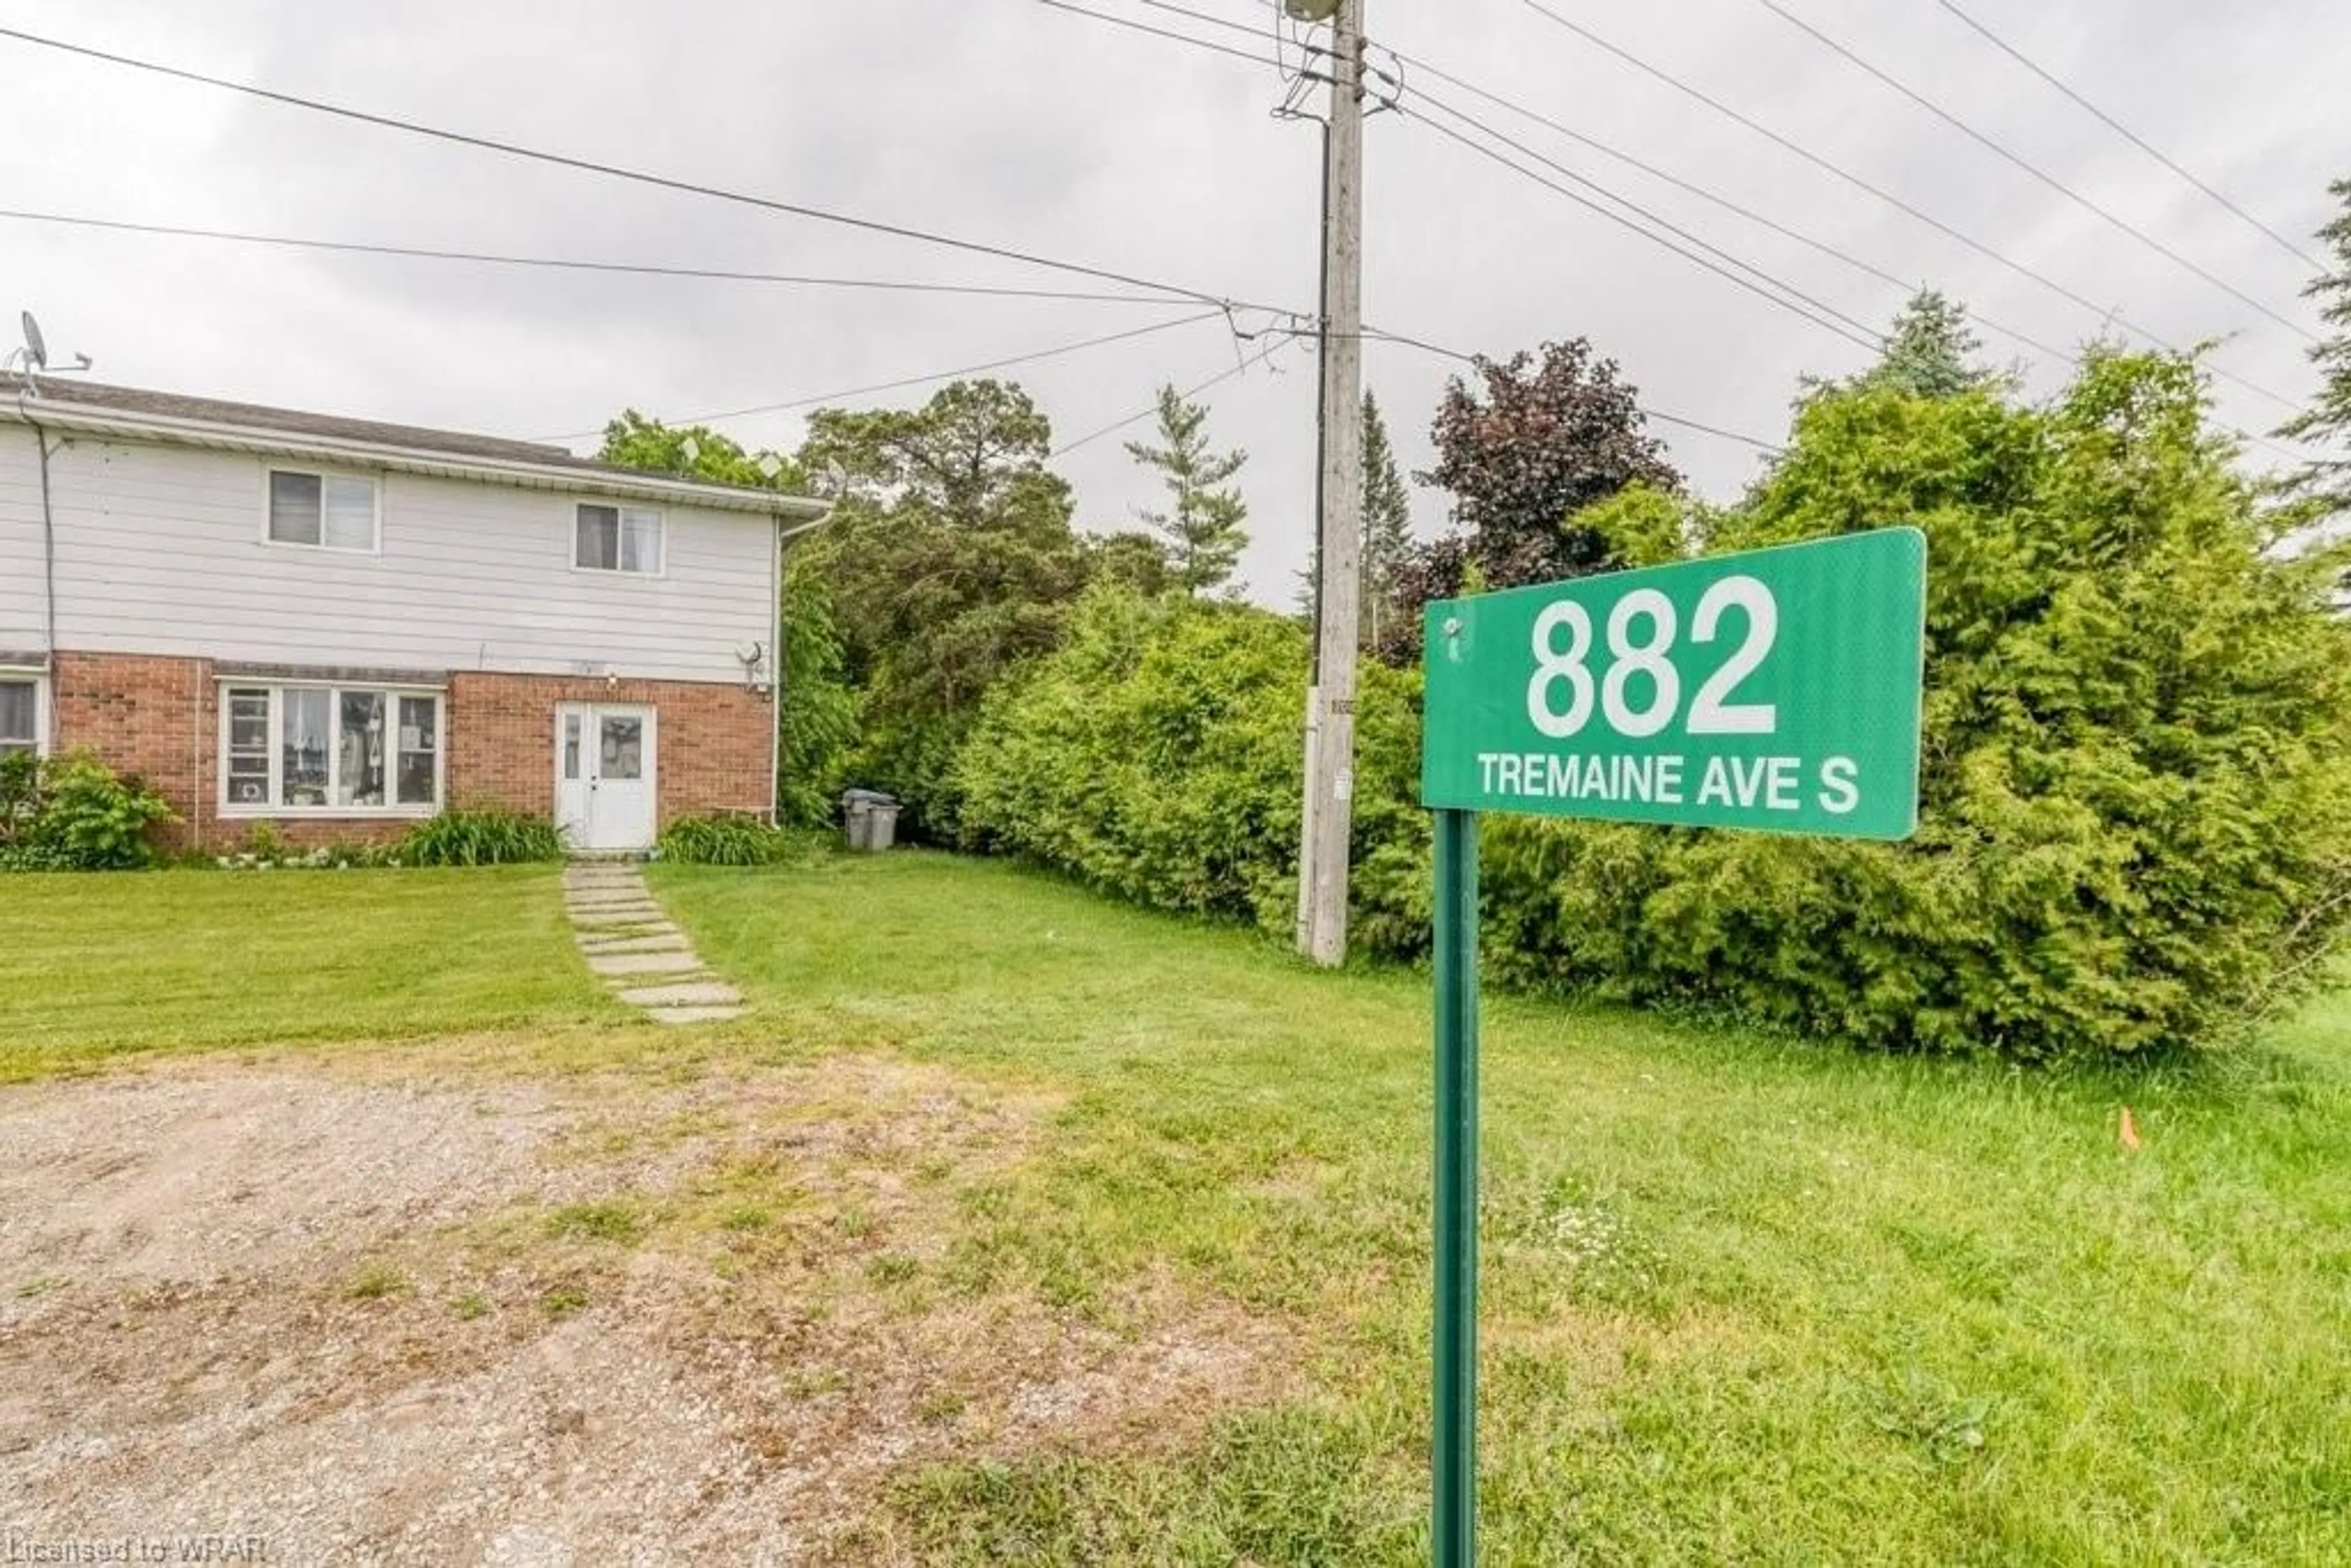 Street view for 882 Tremaine Ave, Listowel Ontario N4W 3G9